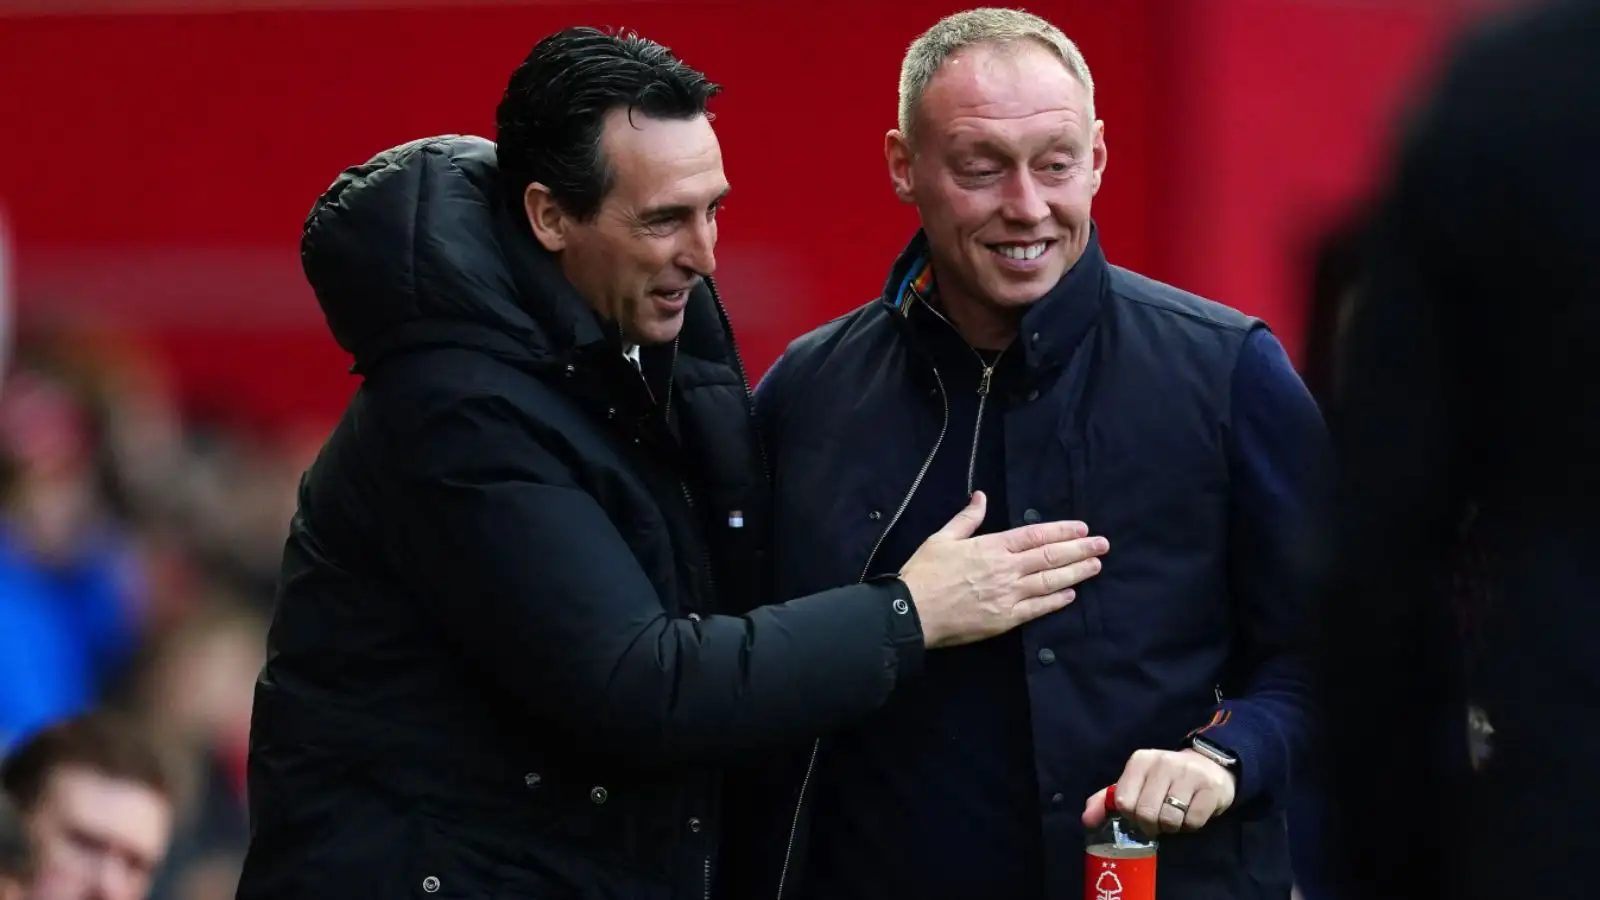 Nottingham Forest employer Steve Cooper welcomes Unai Emery before a complemented.